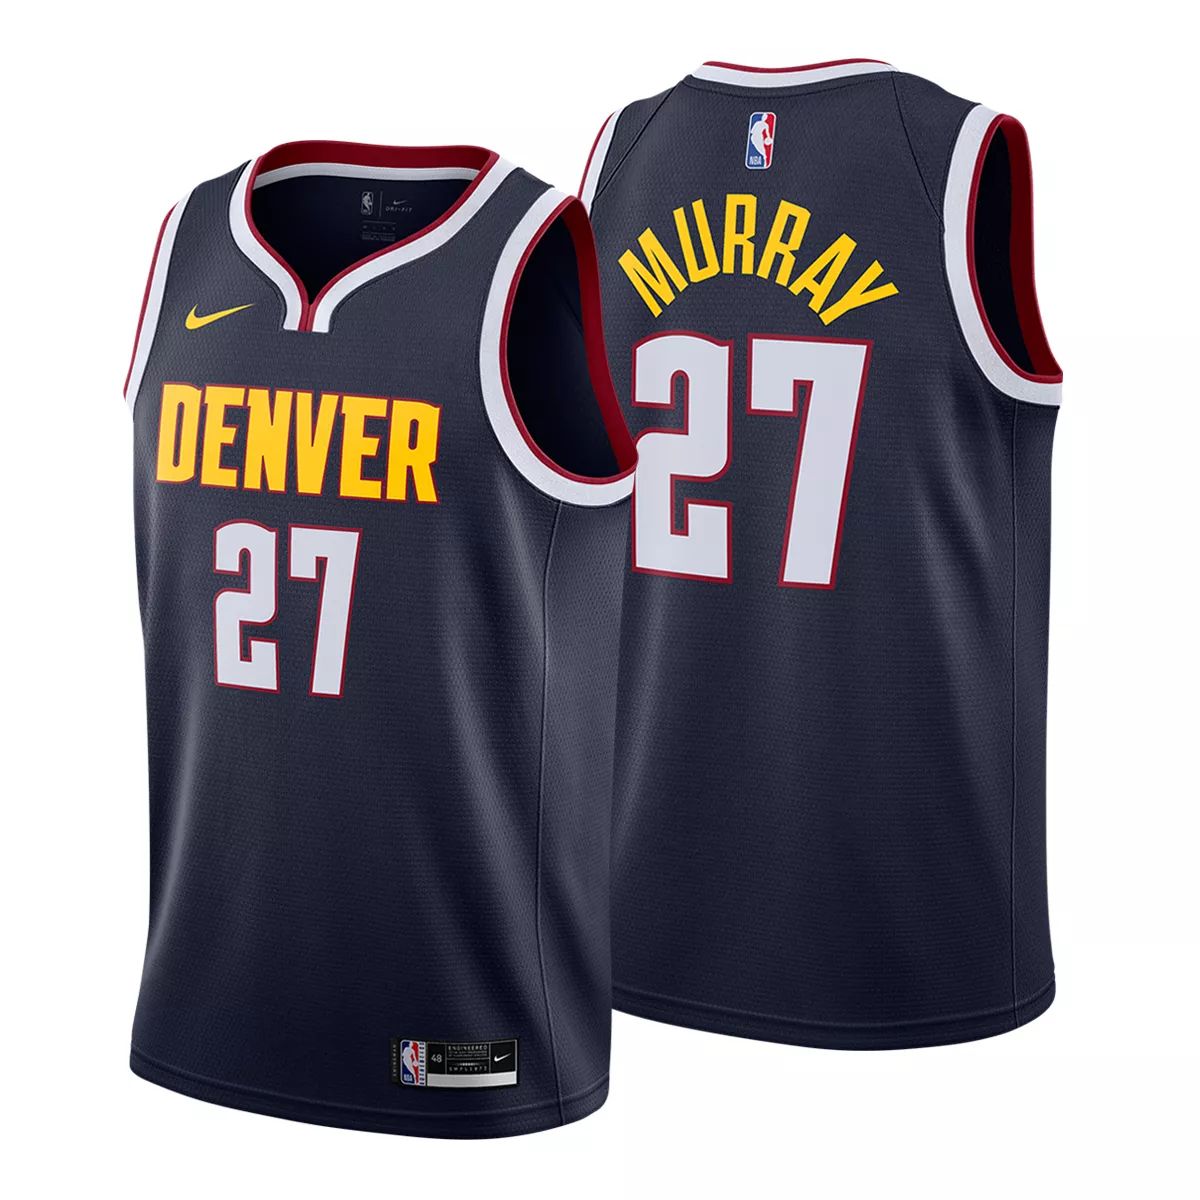 From simple to iconic, take a look at the Nuggets' jerseys through